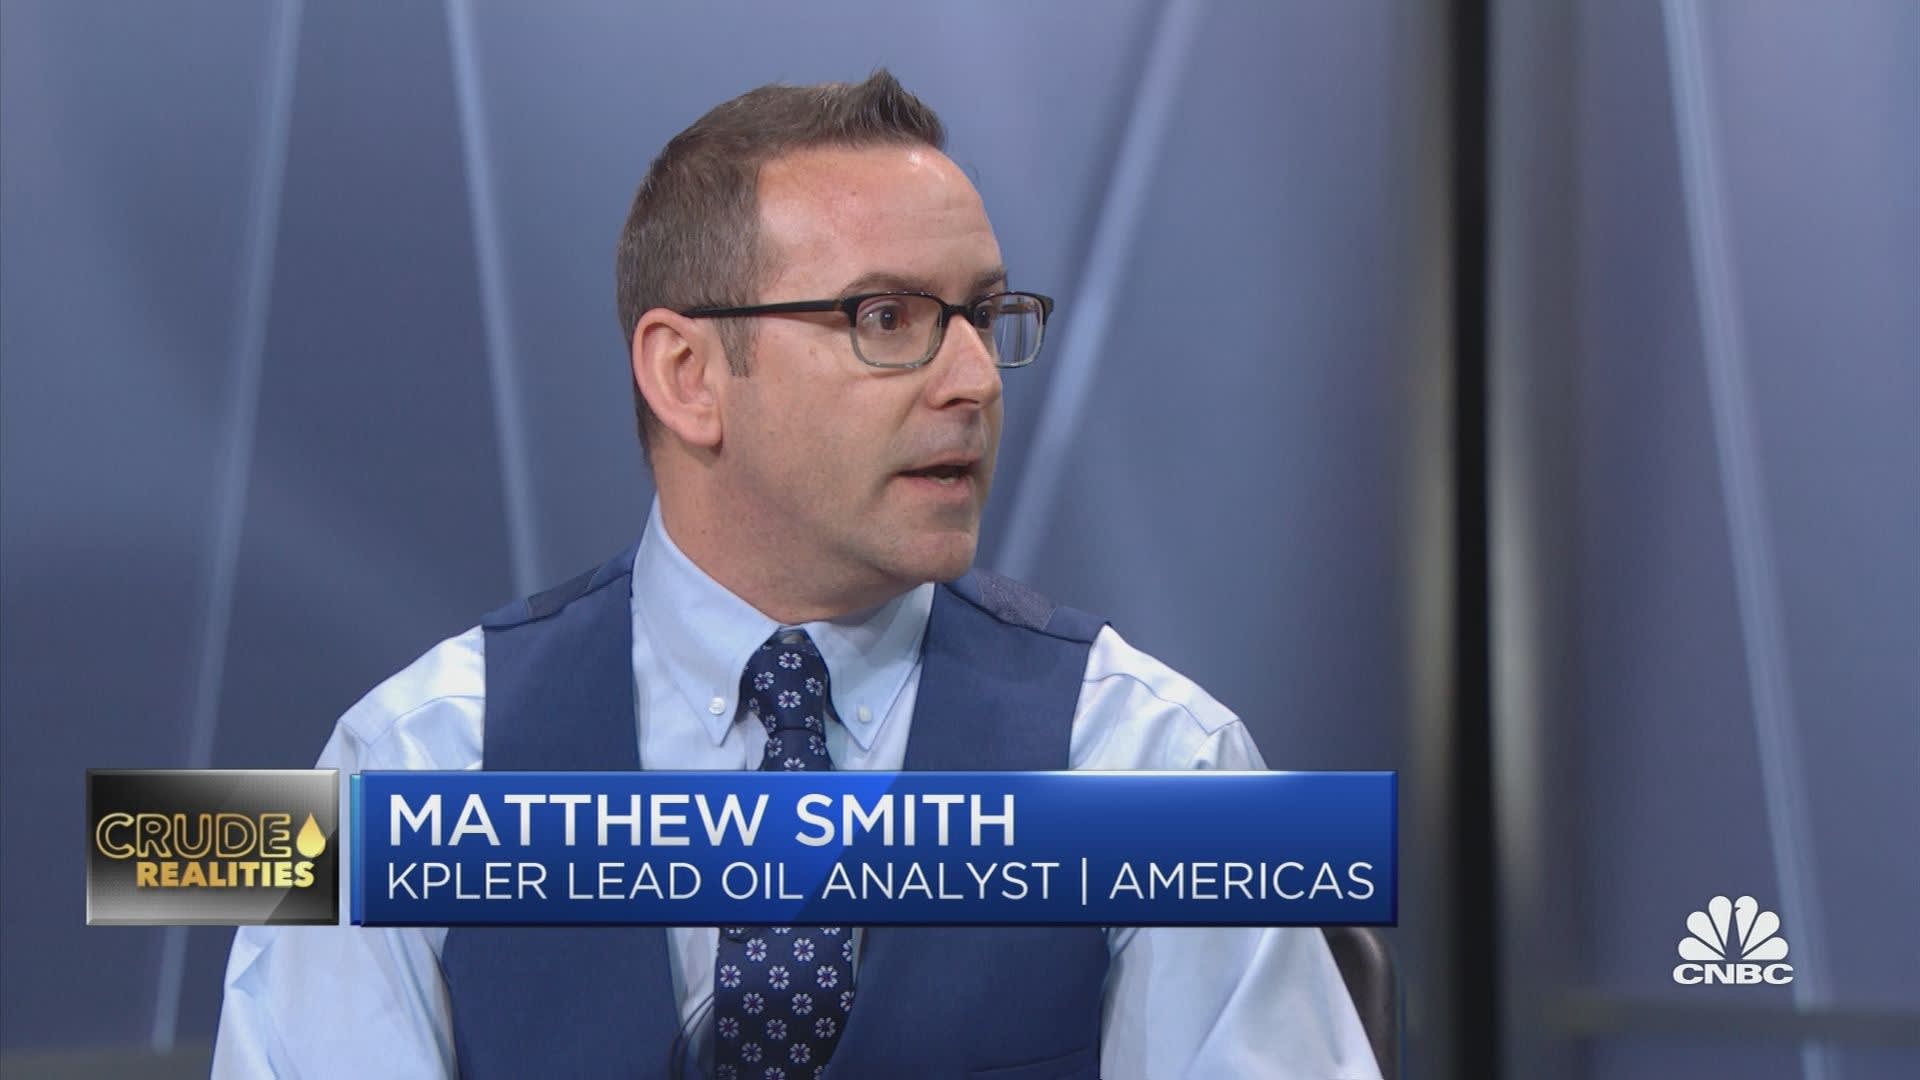 If prices remain closer to $80 a barrel, expect production cuts from OPEC, says Kpler's Matthew Smith